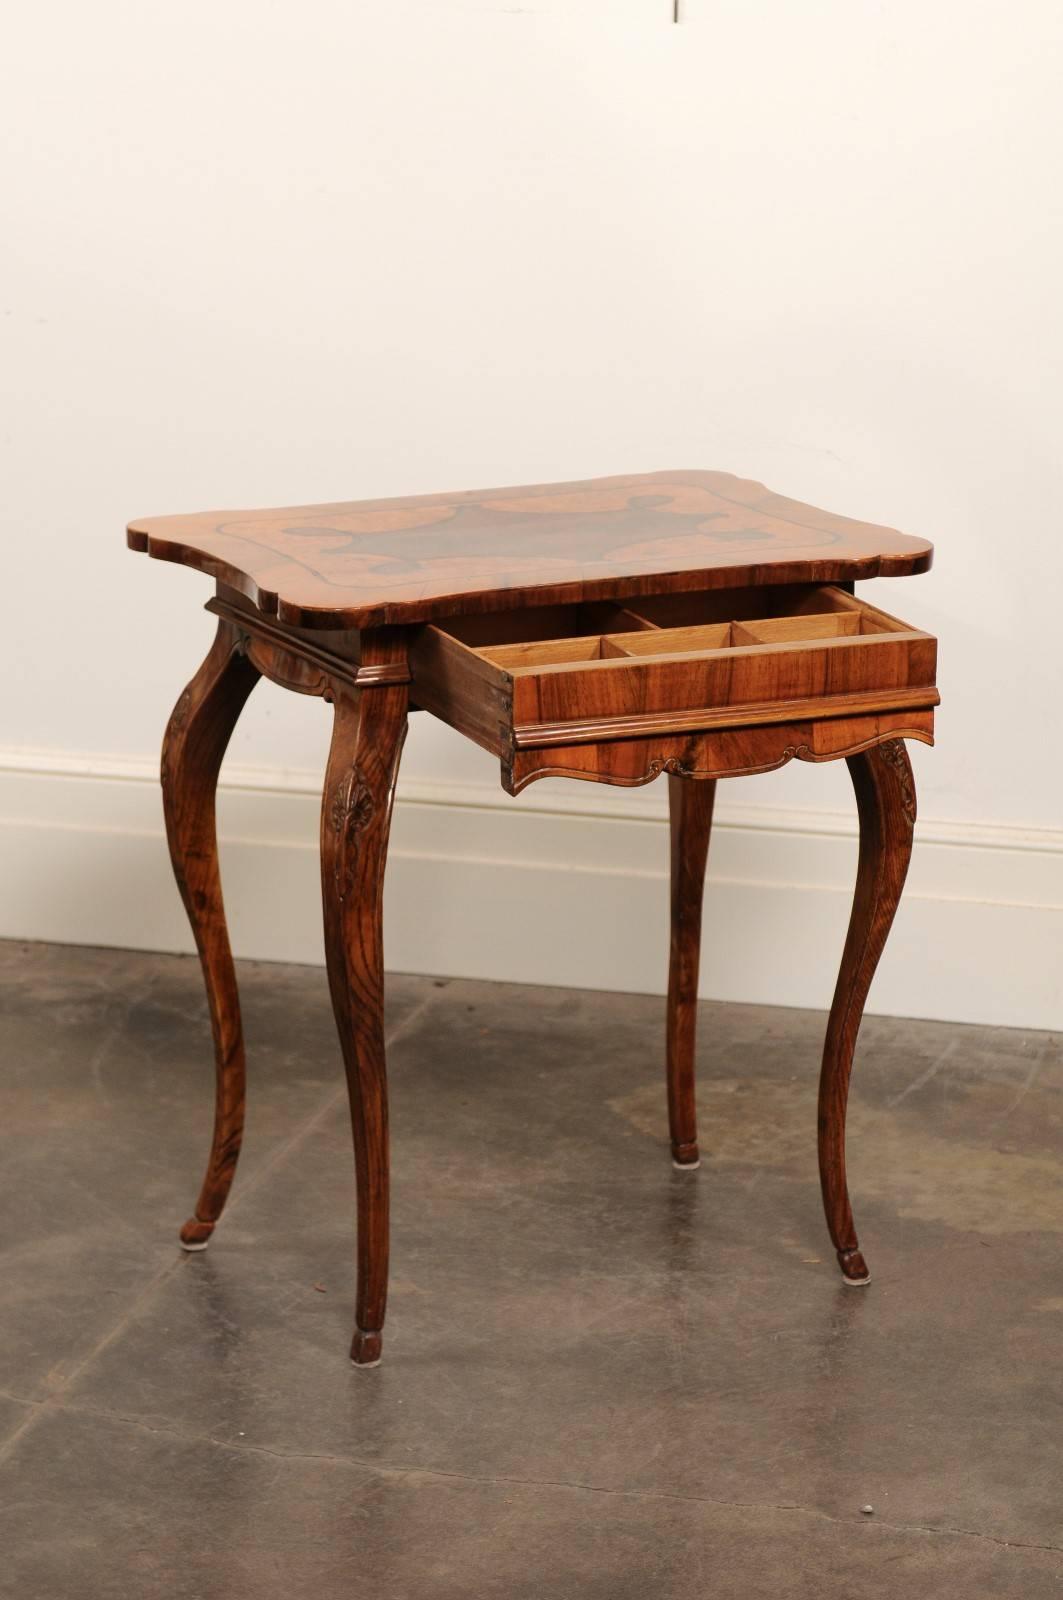 19th Century Italian Rococo Style Side Table circa 1850 with Inlaid Top and Single Drawer